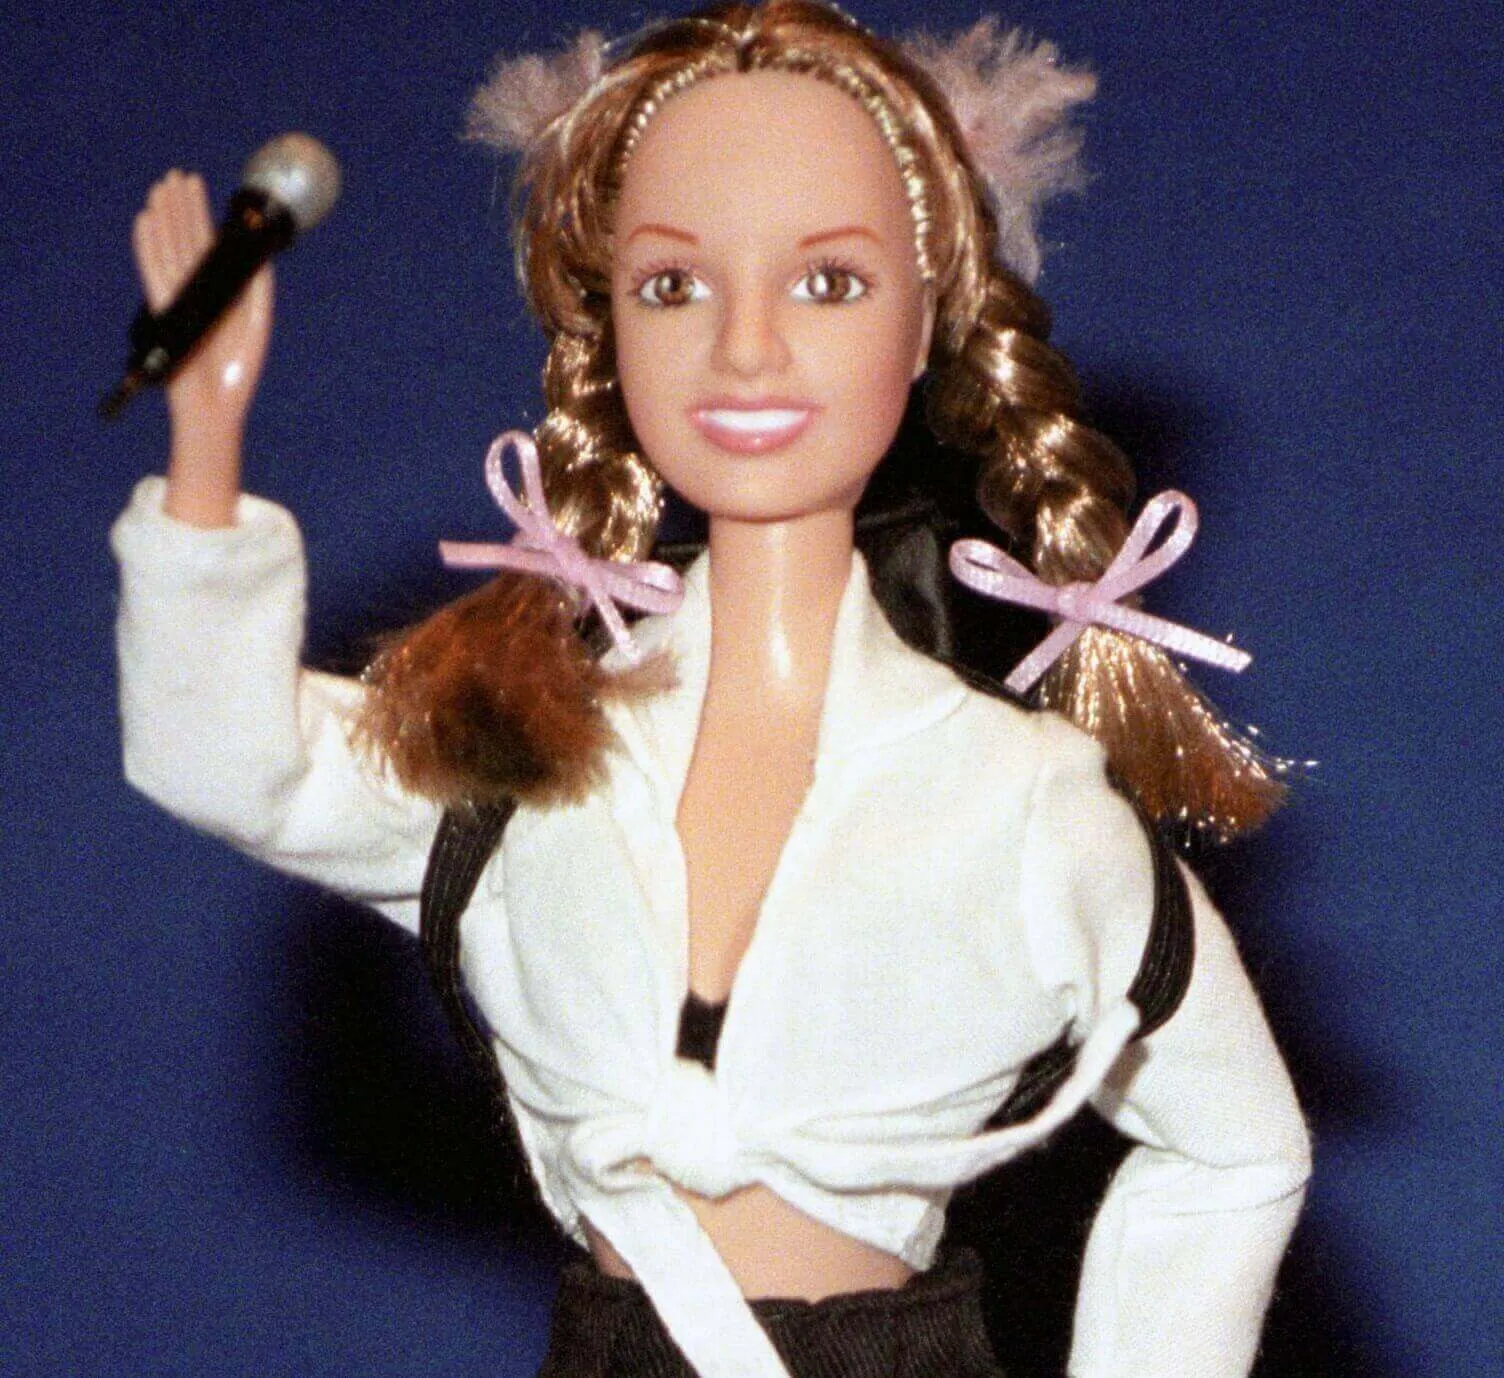 A doll dressed like Britney Spears in the "...Baby One More Time" video